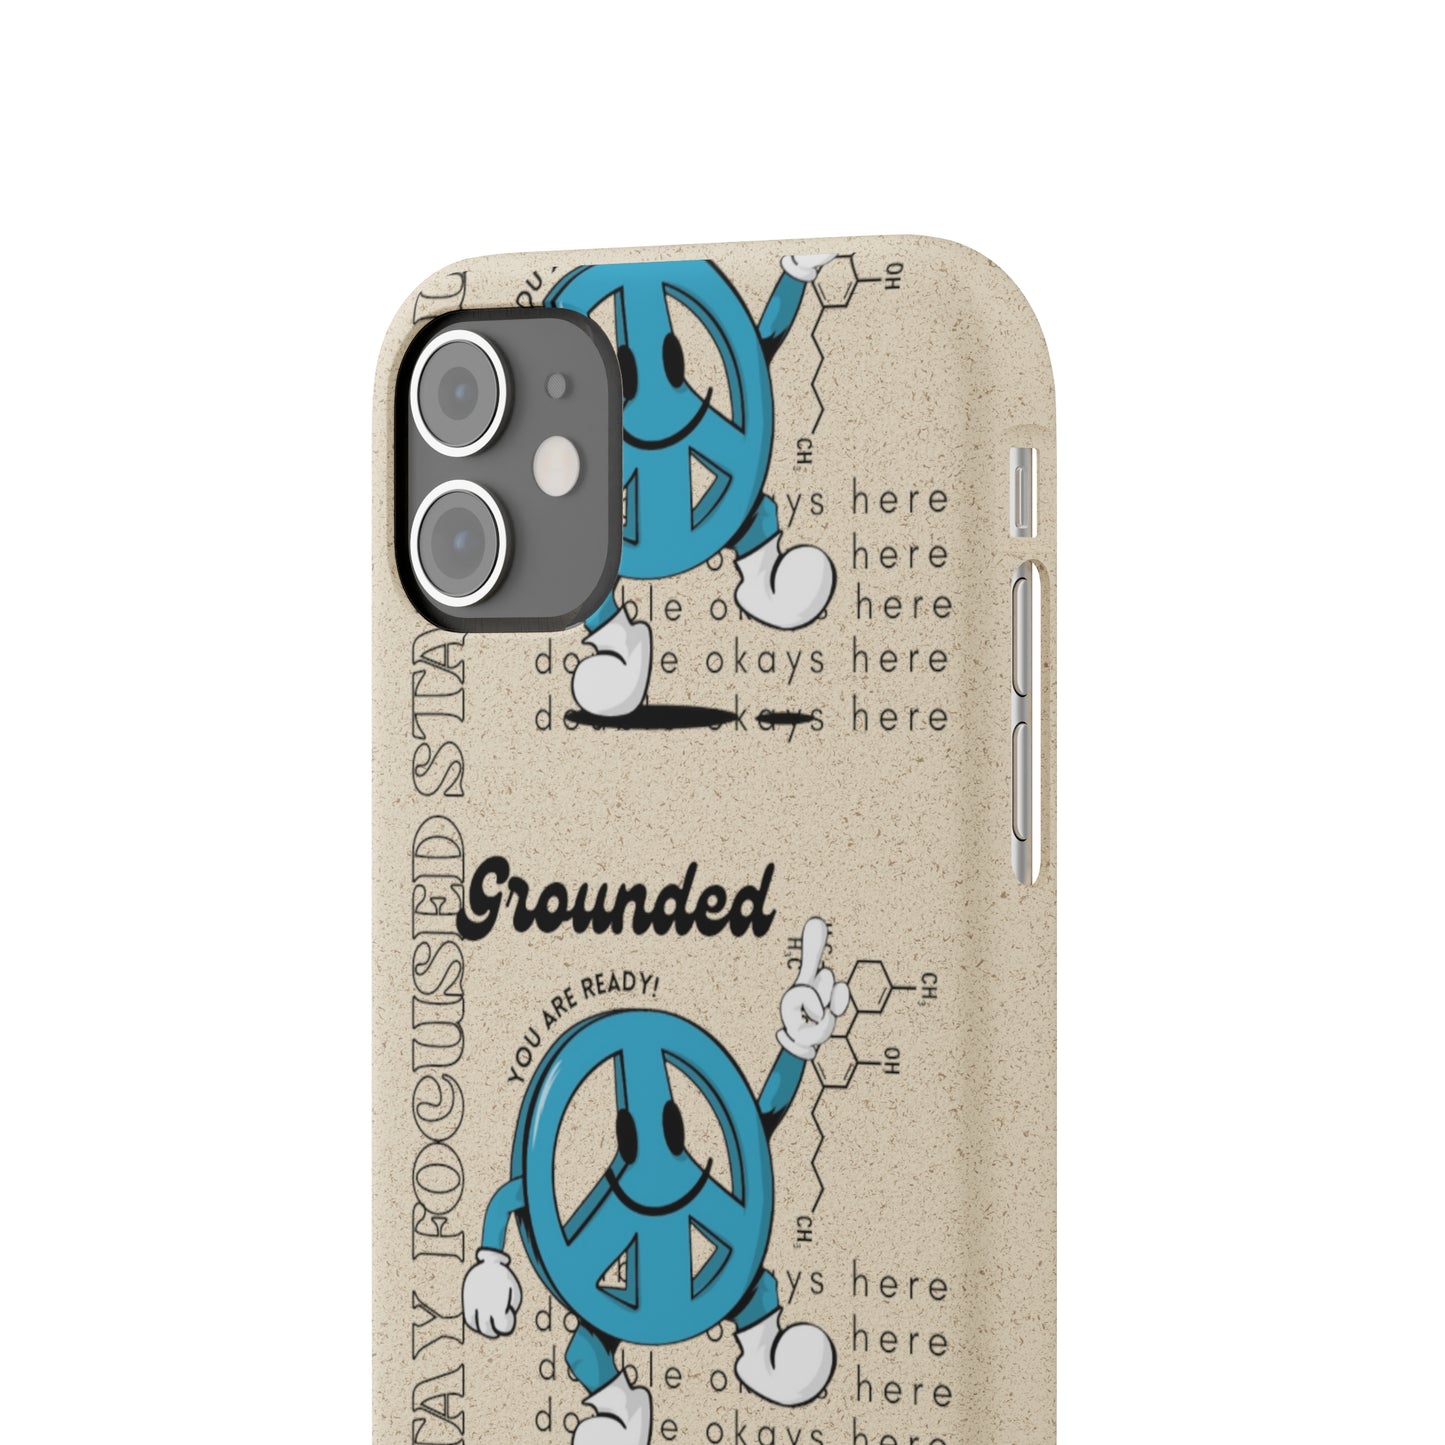 For the Peaceful Pete Biodegradable Phone Case